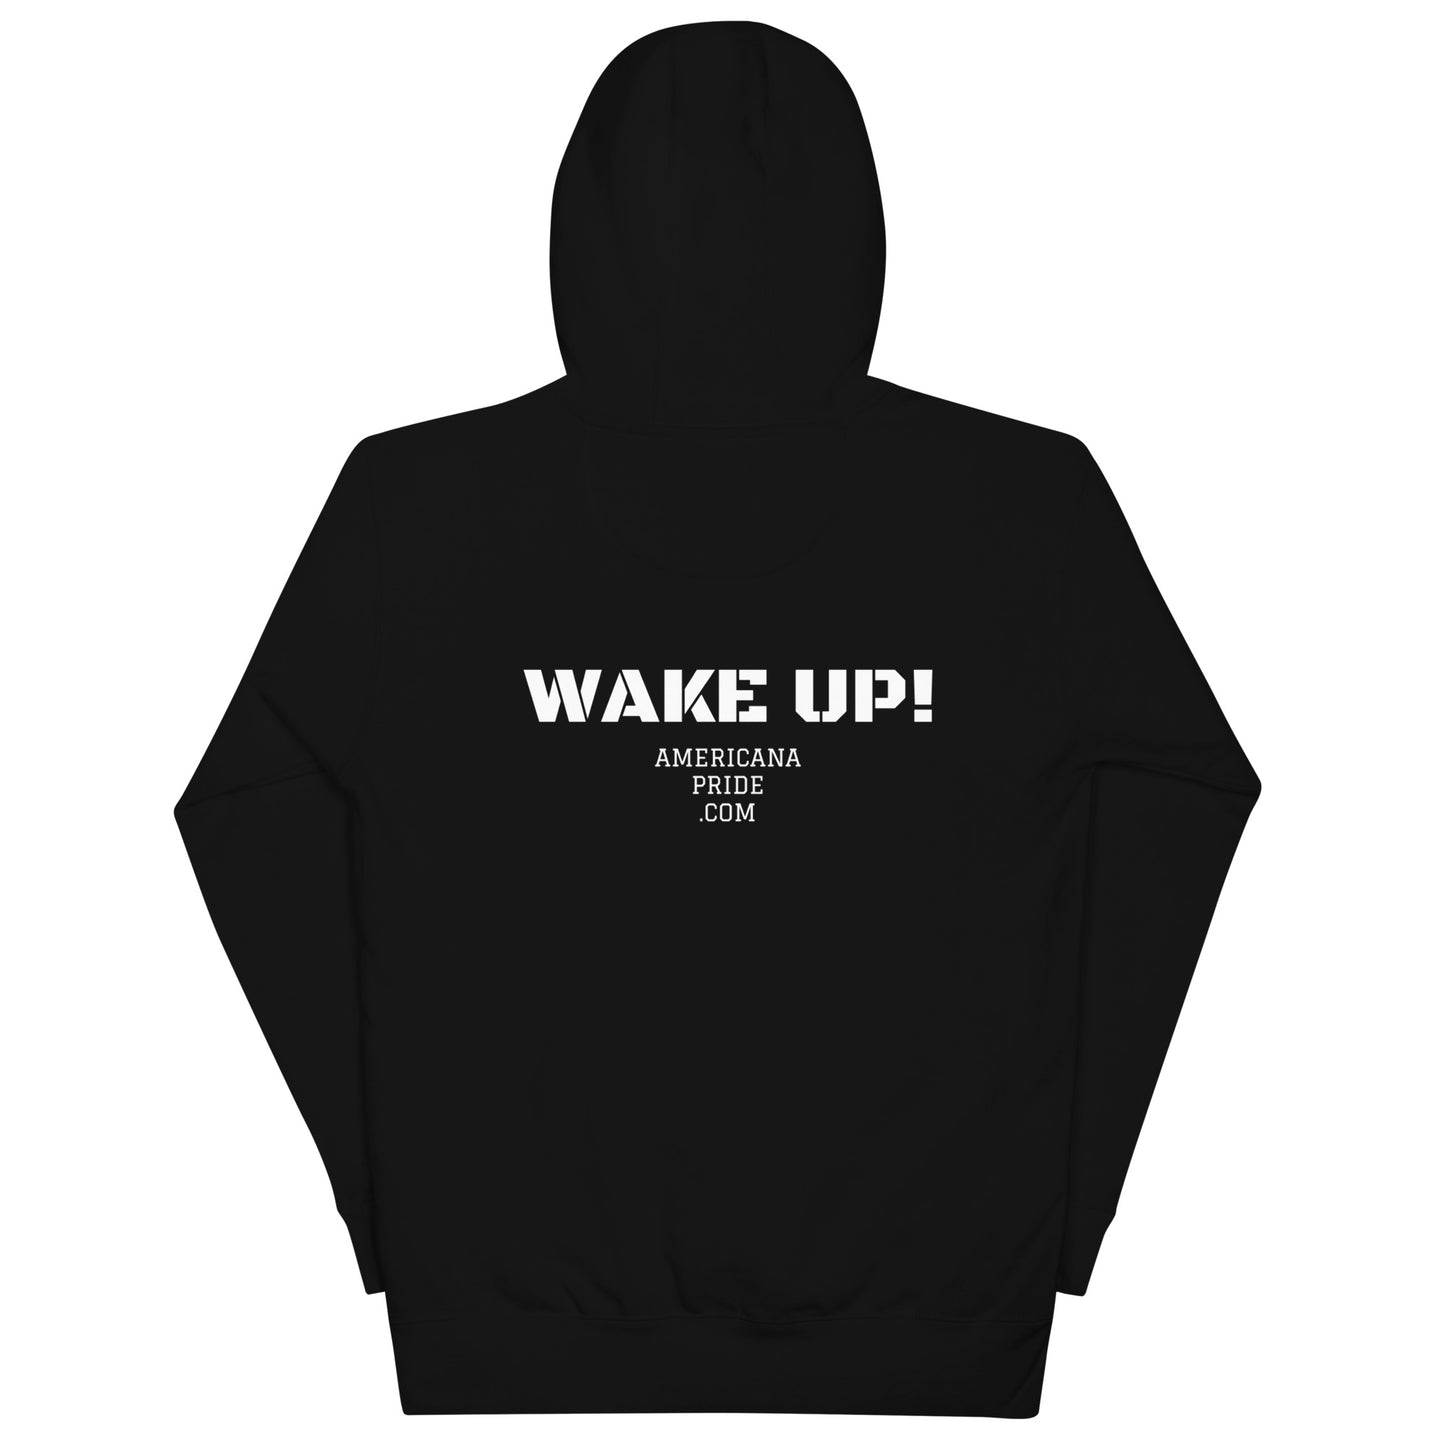 If you are not part of the movement, you ARE the movement - wake up!  Unisex Hoodie (white lettering)